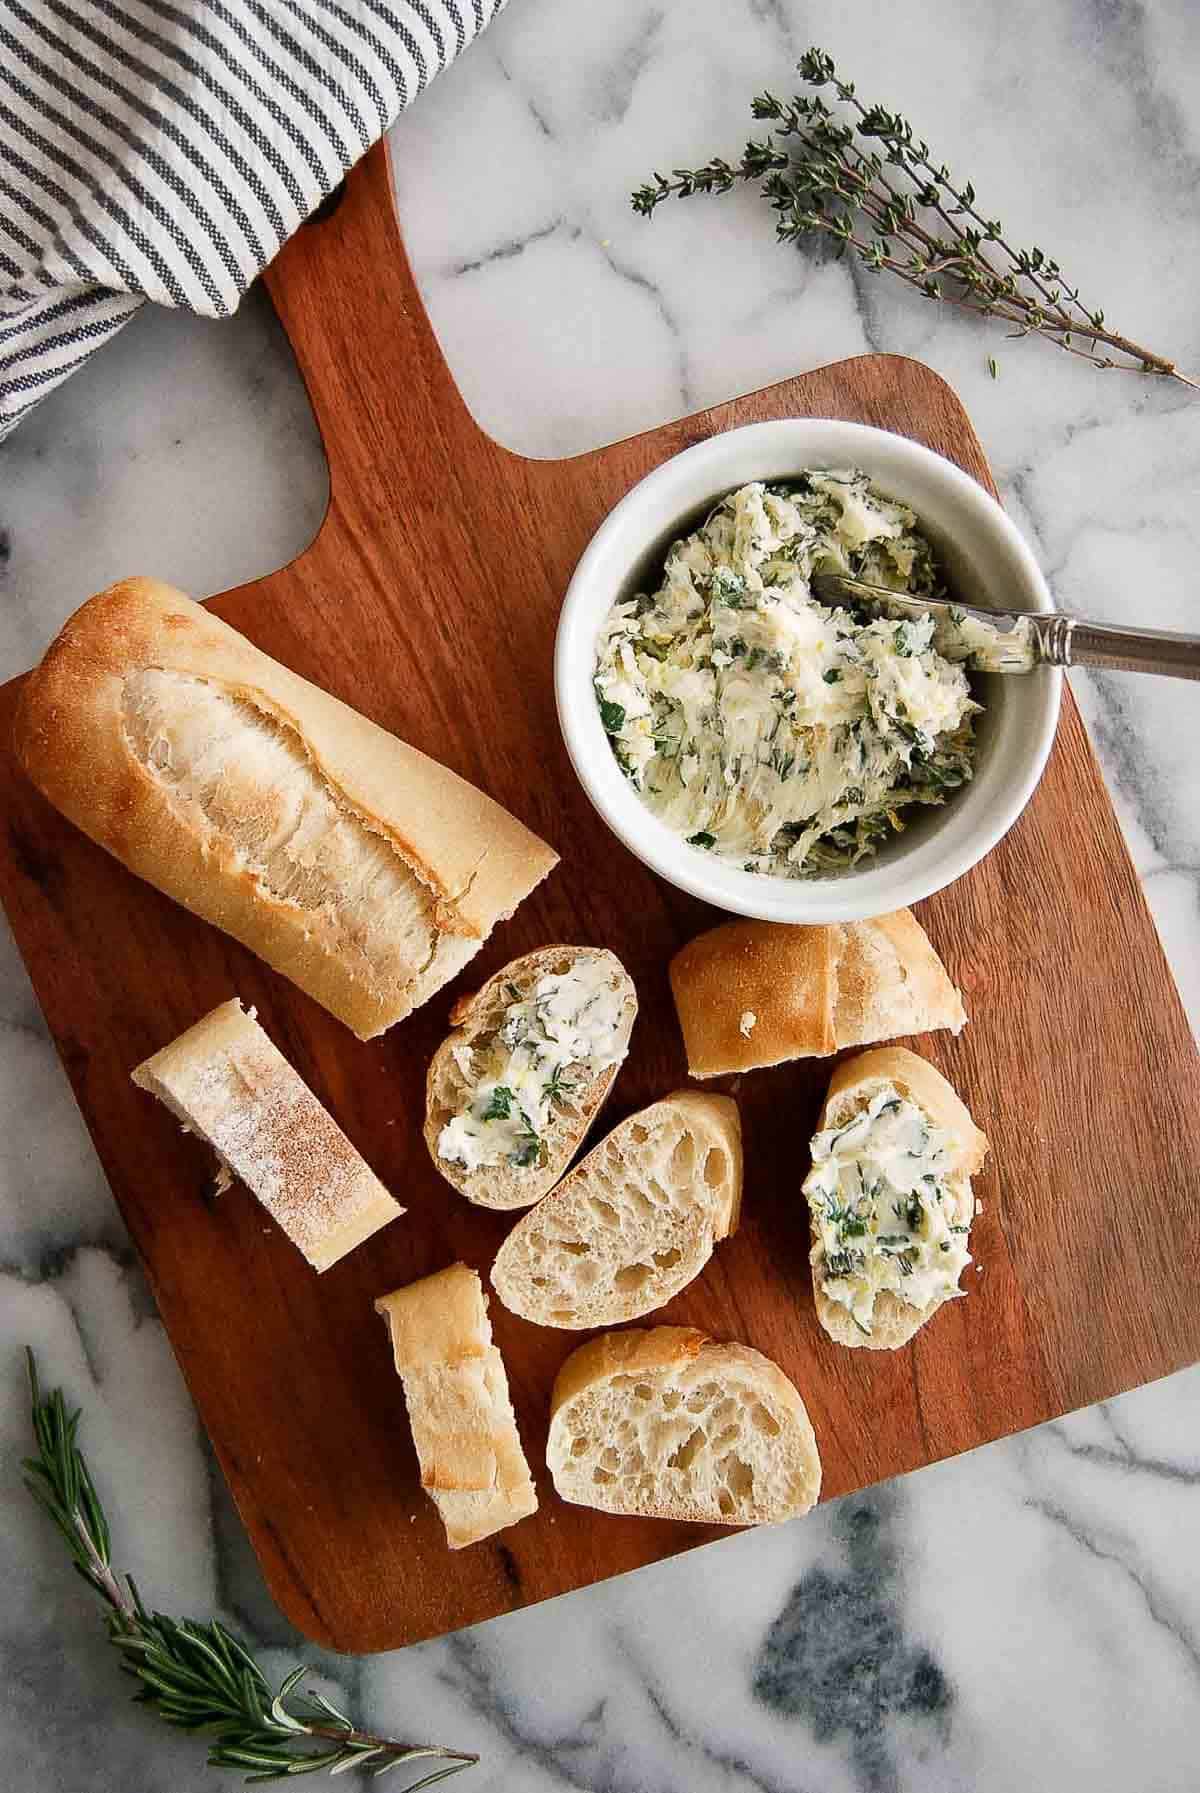 bowl of garlic butter with seasoning on cutting board with sliced baguette pieces.